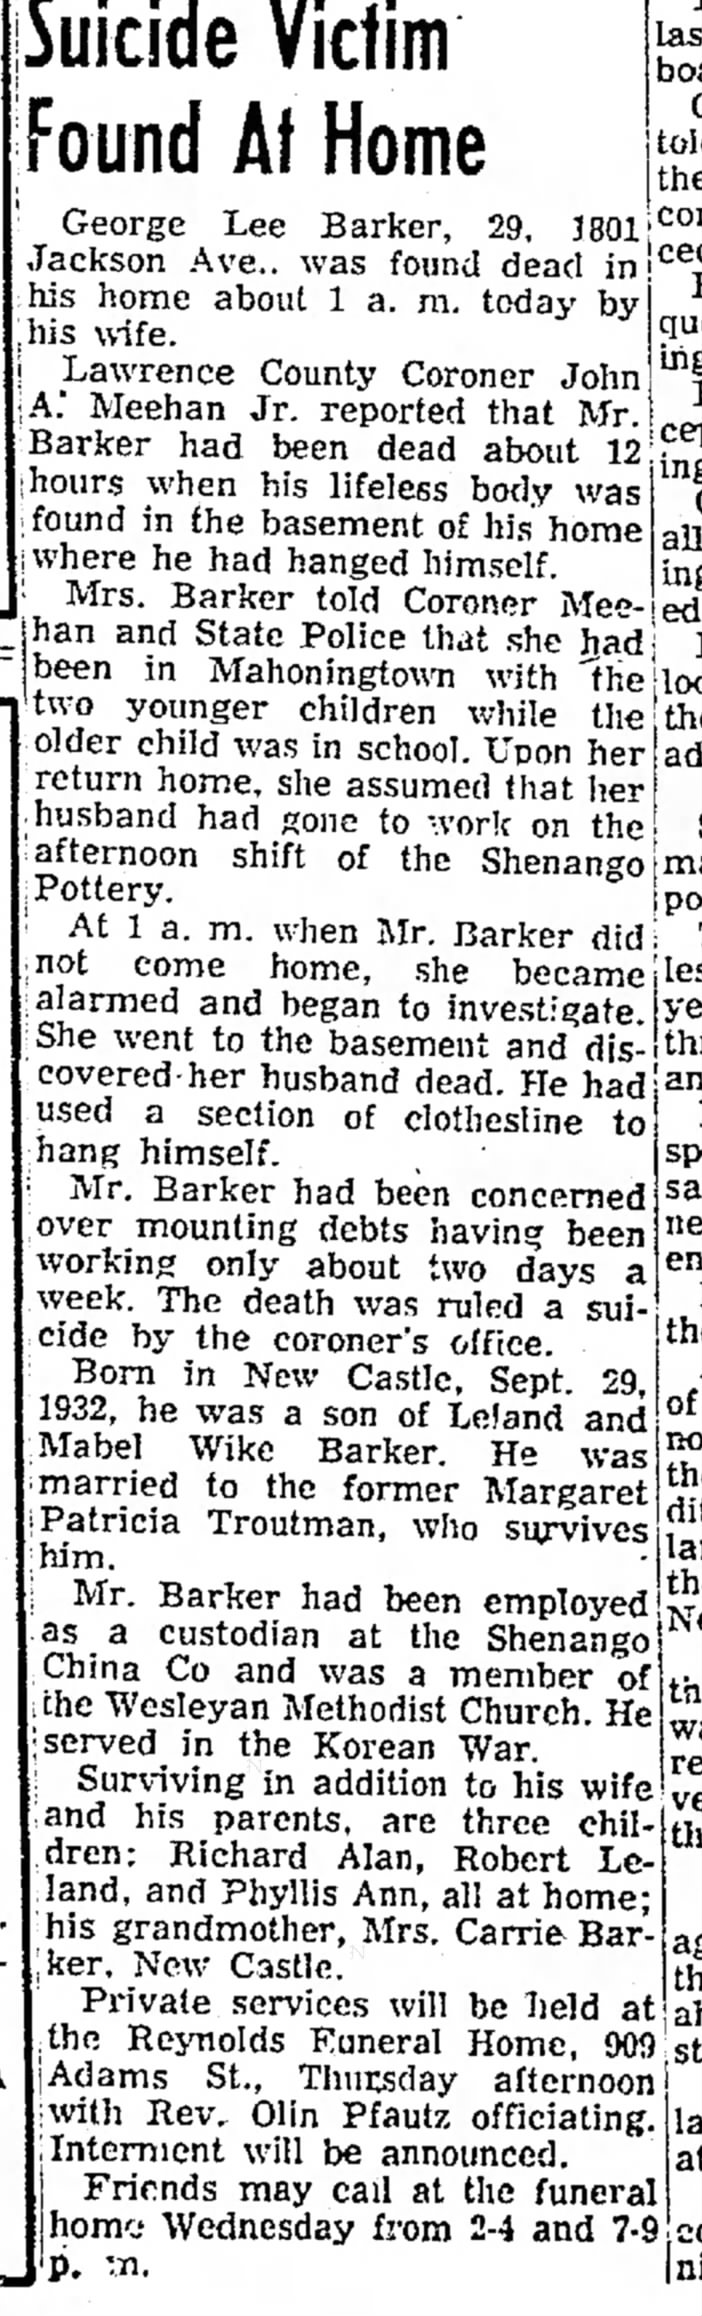 New Castle News, 14 Mar 1961, page 2